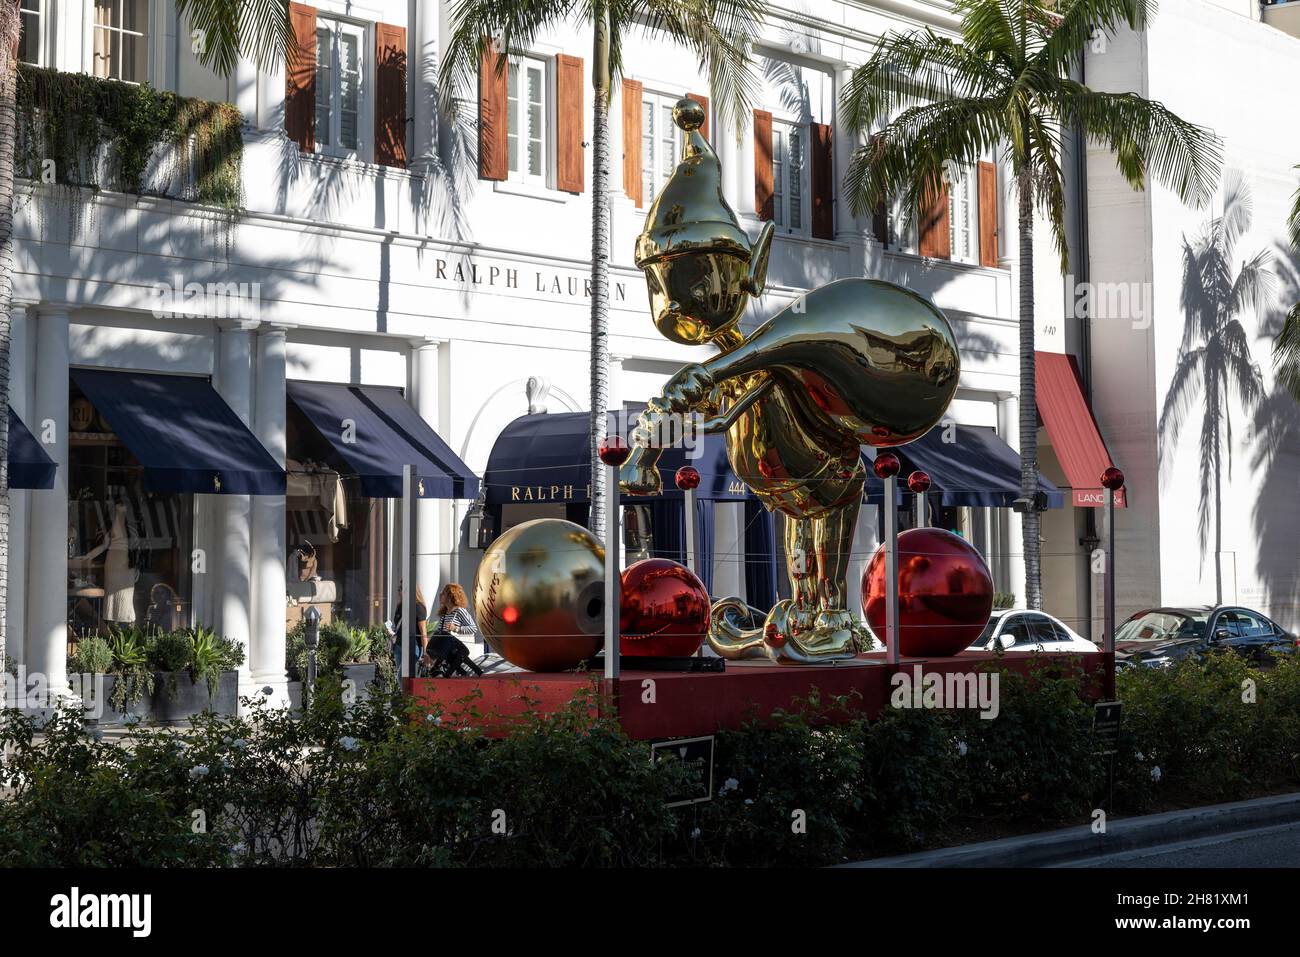 Beverly Hills, CA USA - November 25, 2021: Santas Elves and elaborate Christmas decorations on Rodeo Drive in front of the Ralph Lauren store Stock Photo